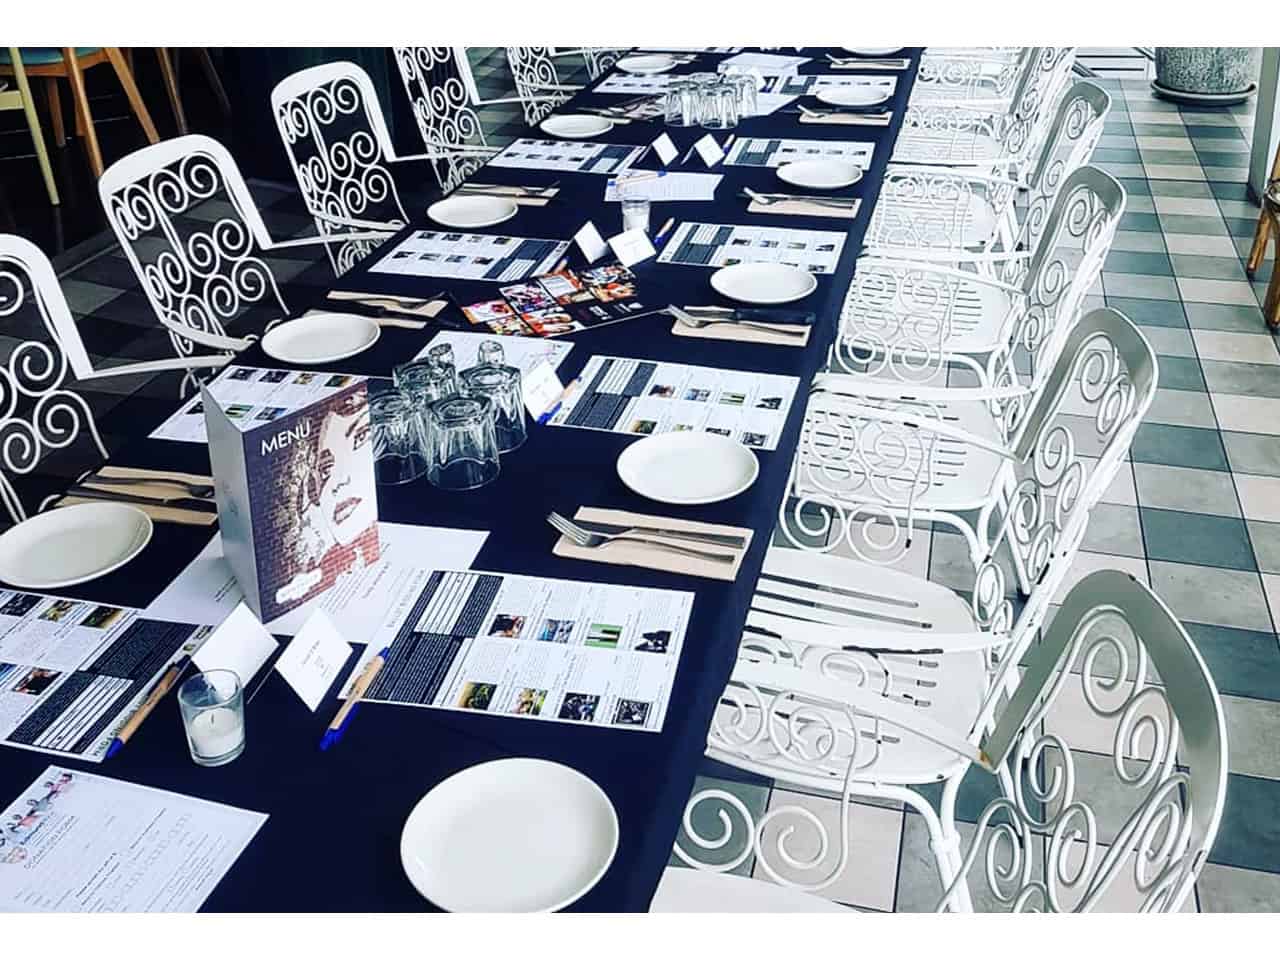 Long table setup for an event